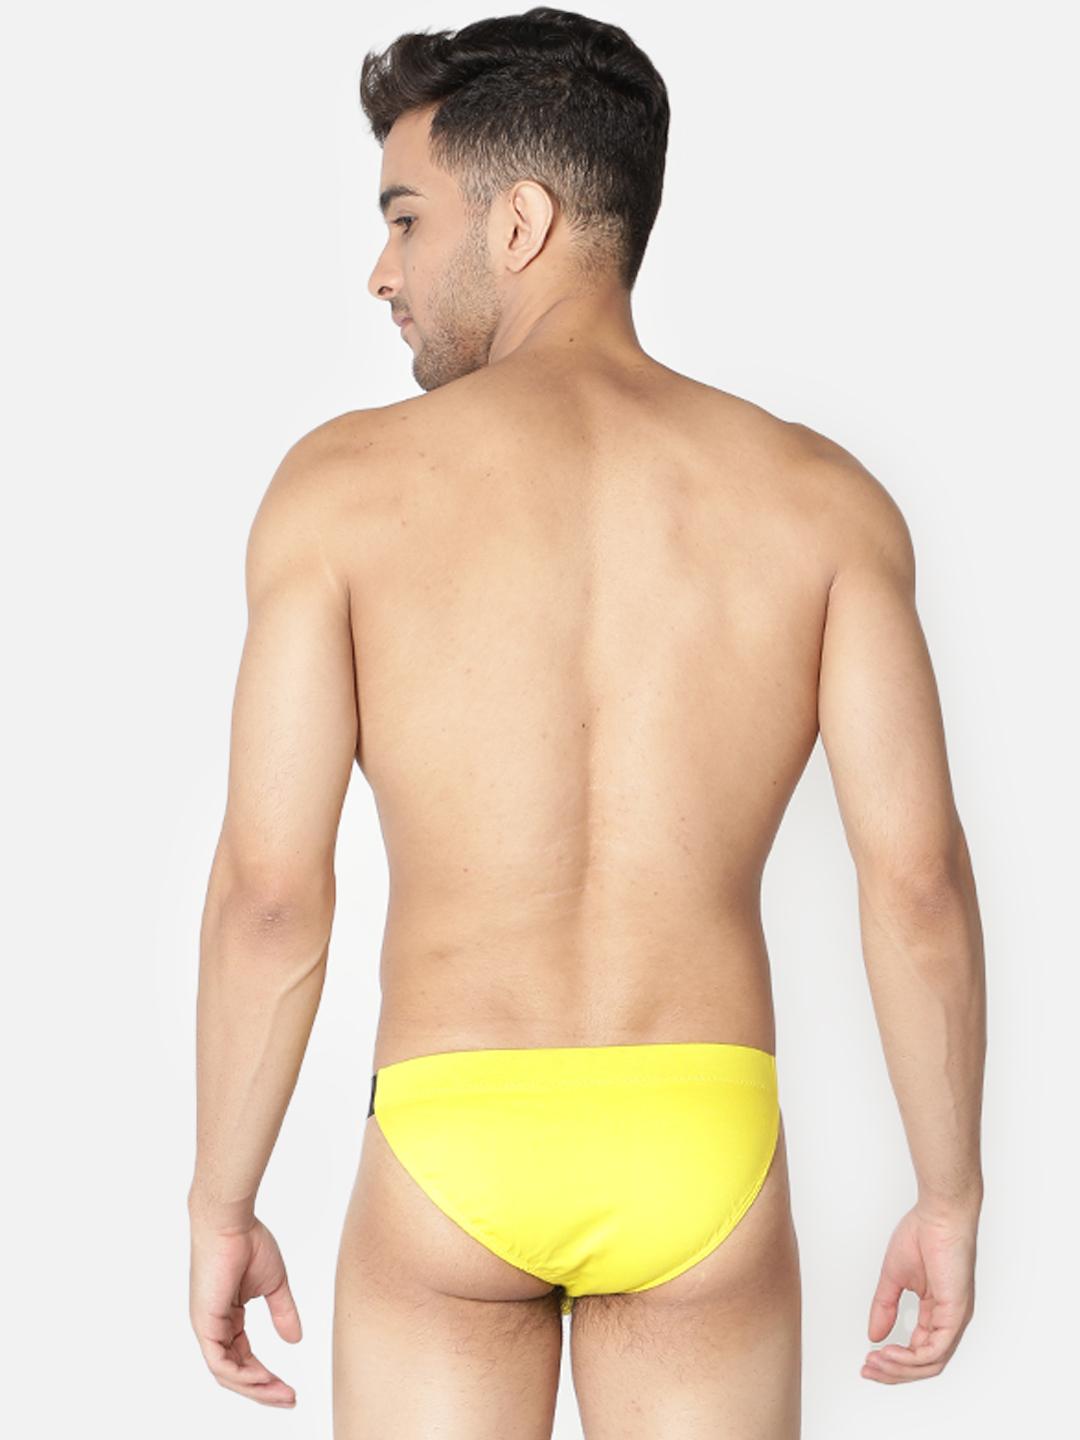 Intimantic Men Solid Tanga Brief 100% Smooth Cotton Pink & Yellow –  Intimantic